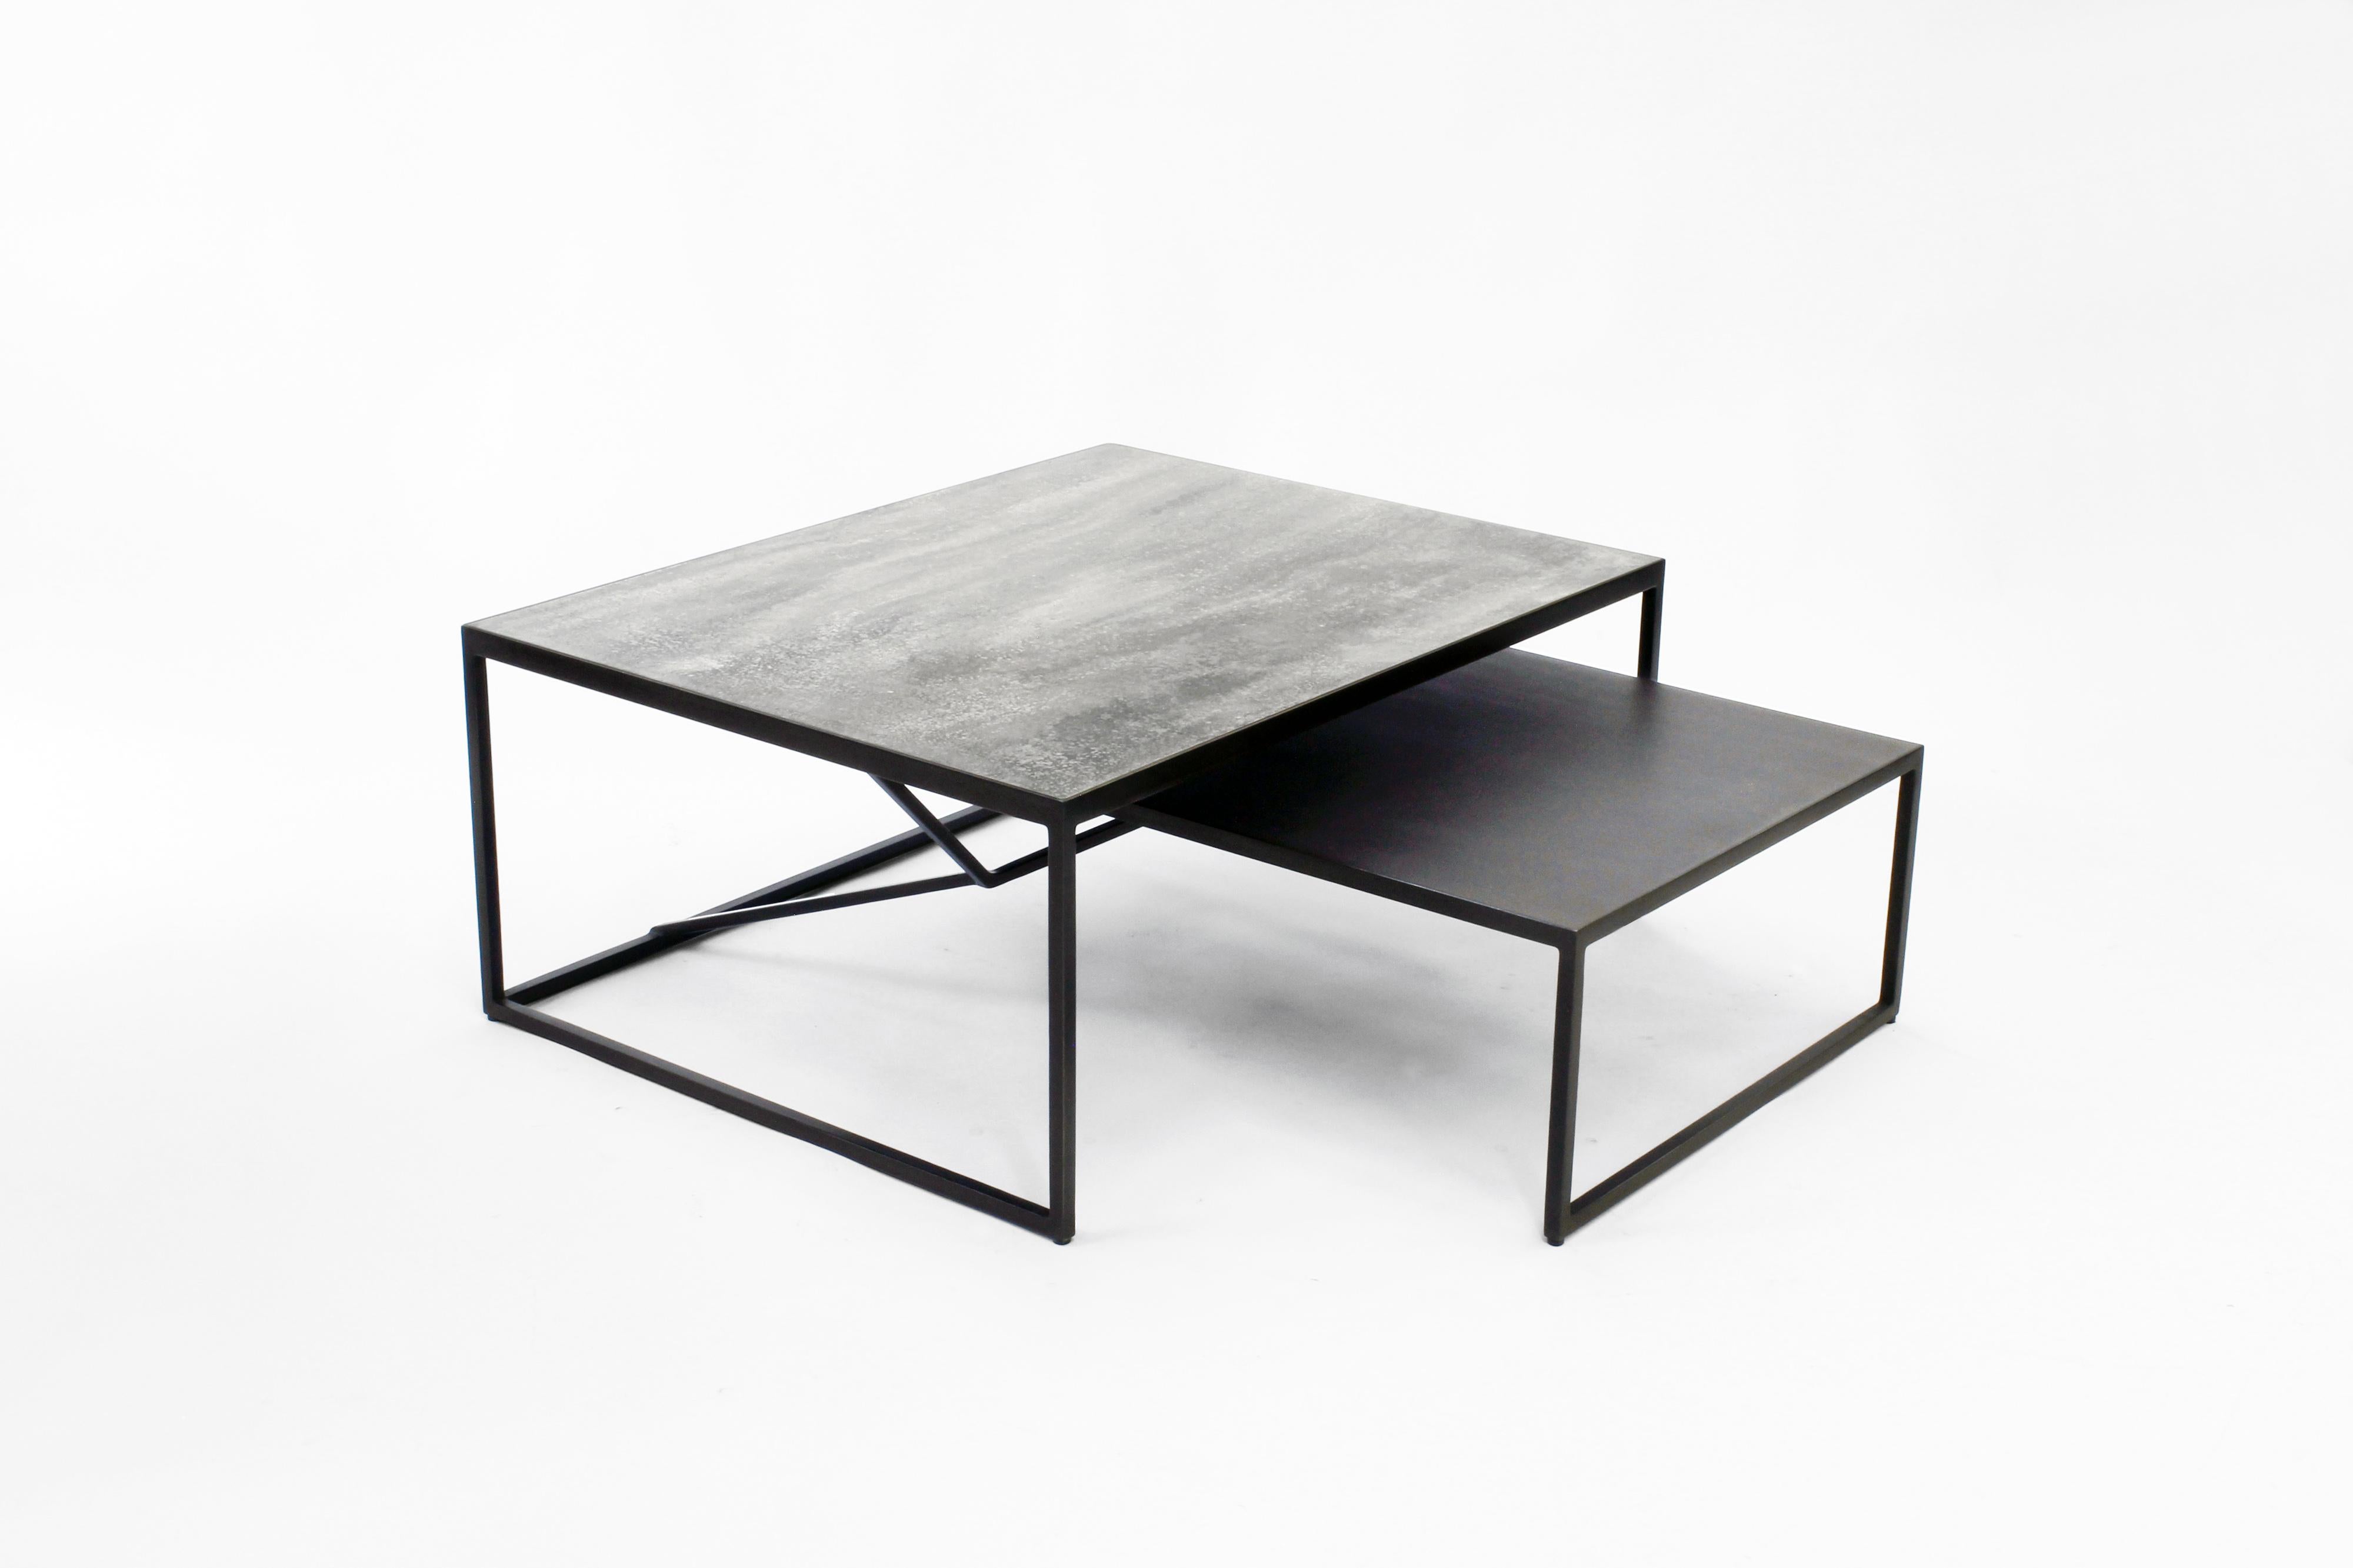 Contemporary Floating Steel, Concrete Nesting Coffee Table, from Joshua Howe Design